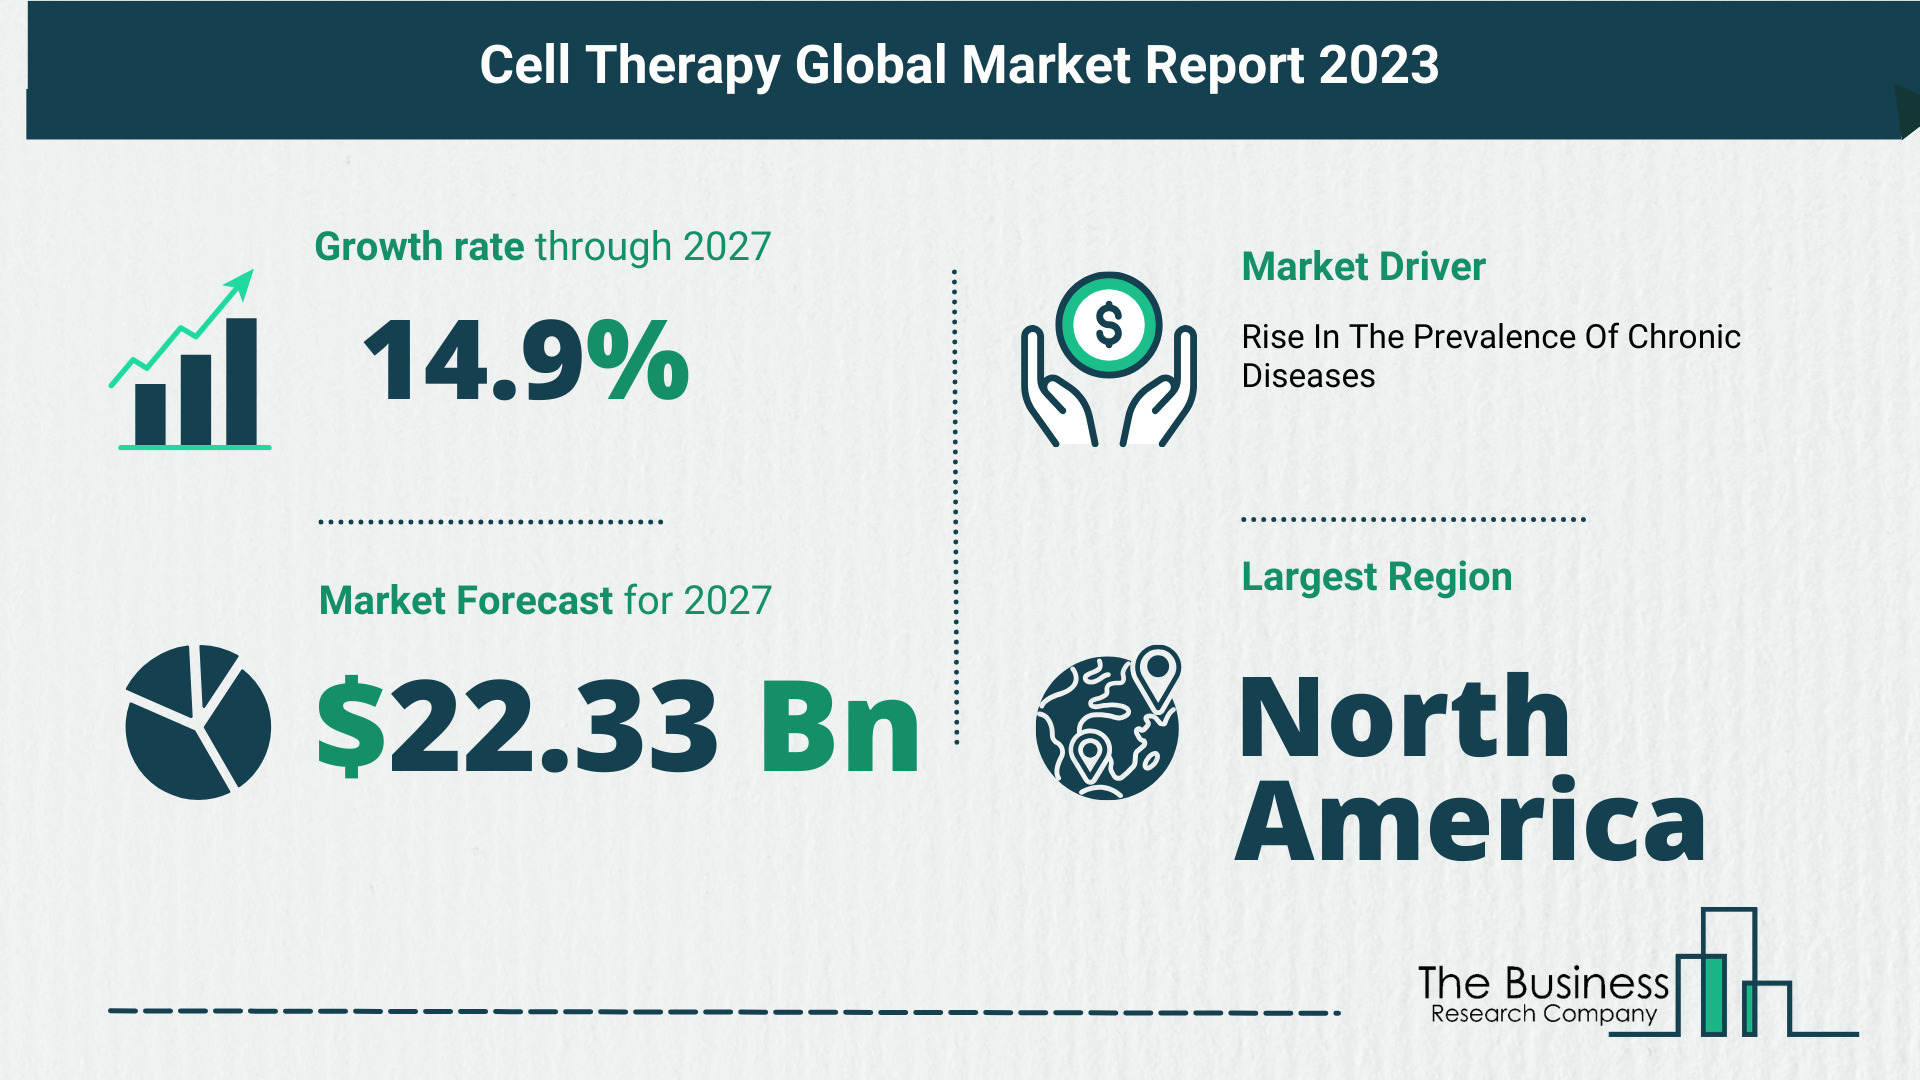 Global Cell Therapy Market Report 2023 – Top Market Trends And Opportunities